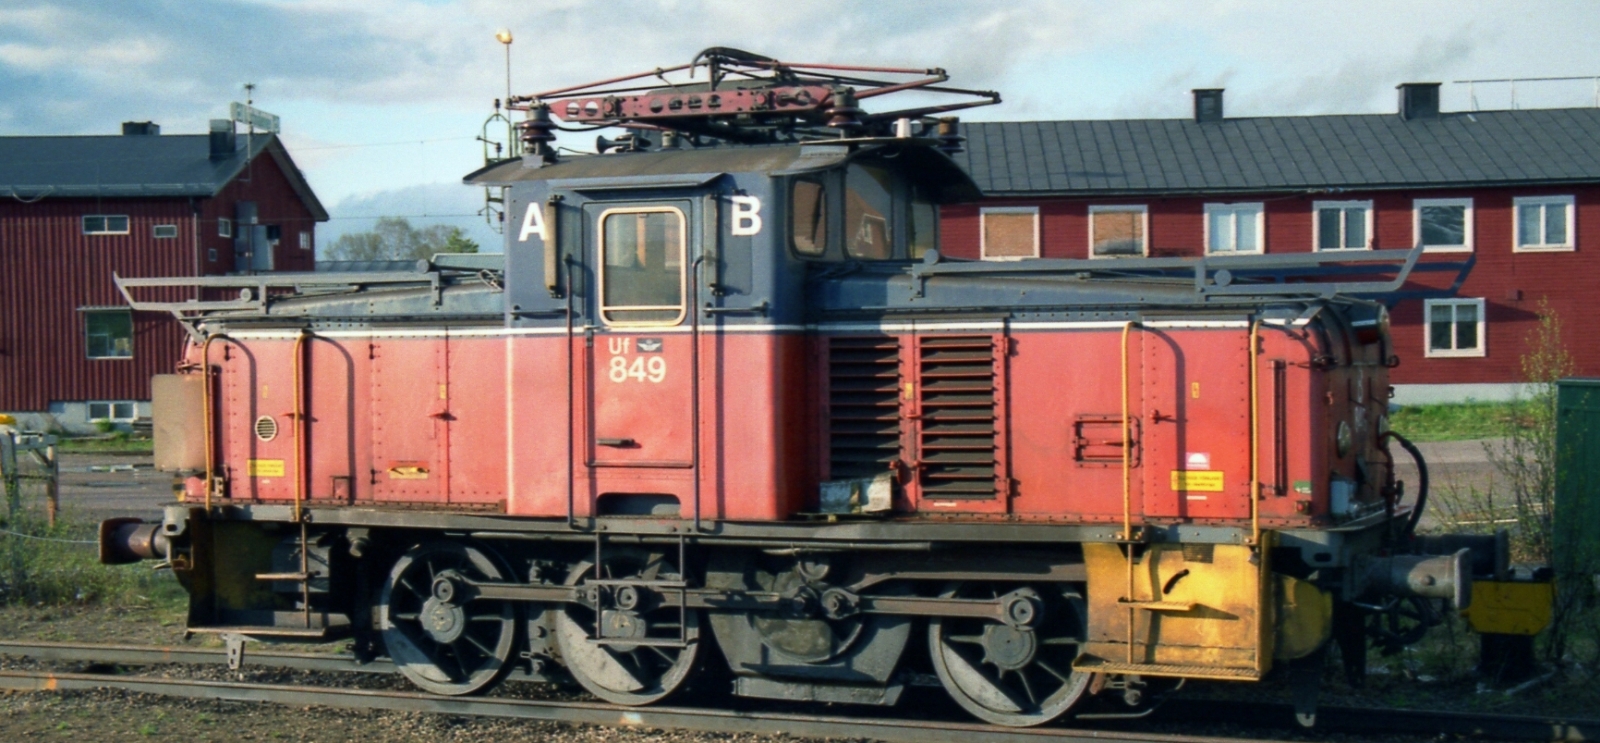 MTAB Uf No. 849 in May 2000 in Gällivare